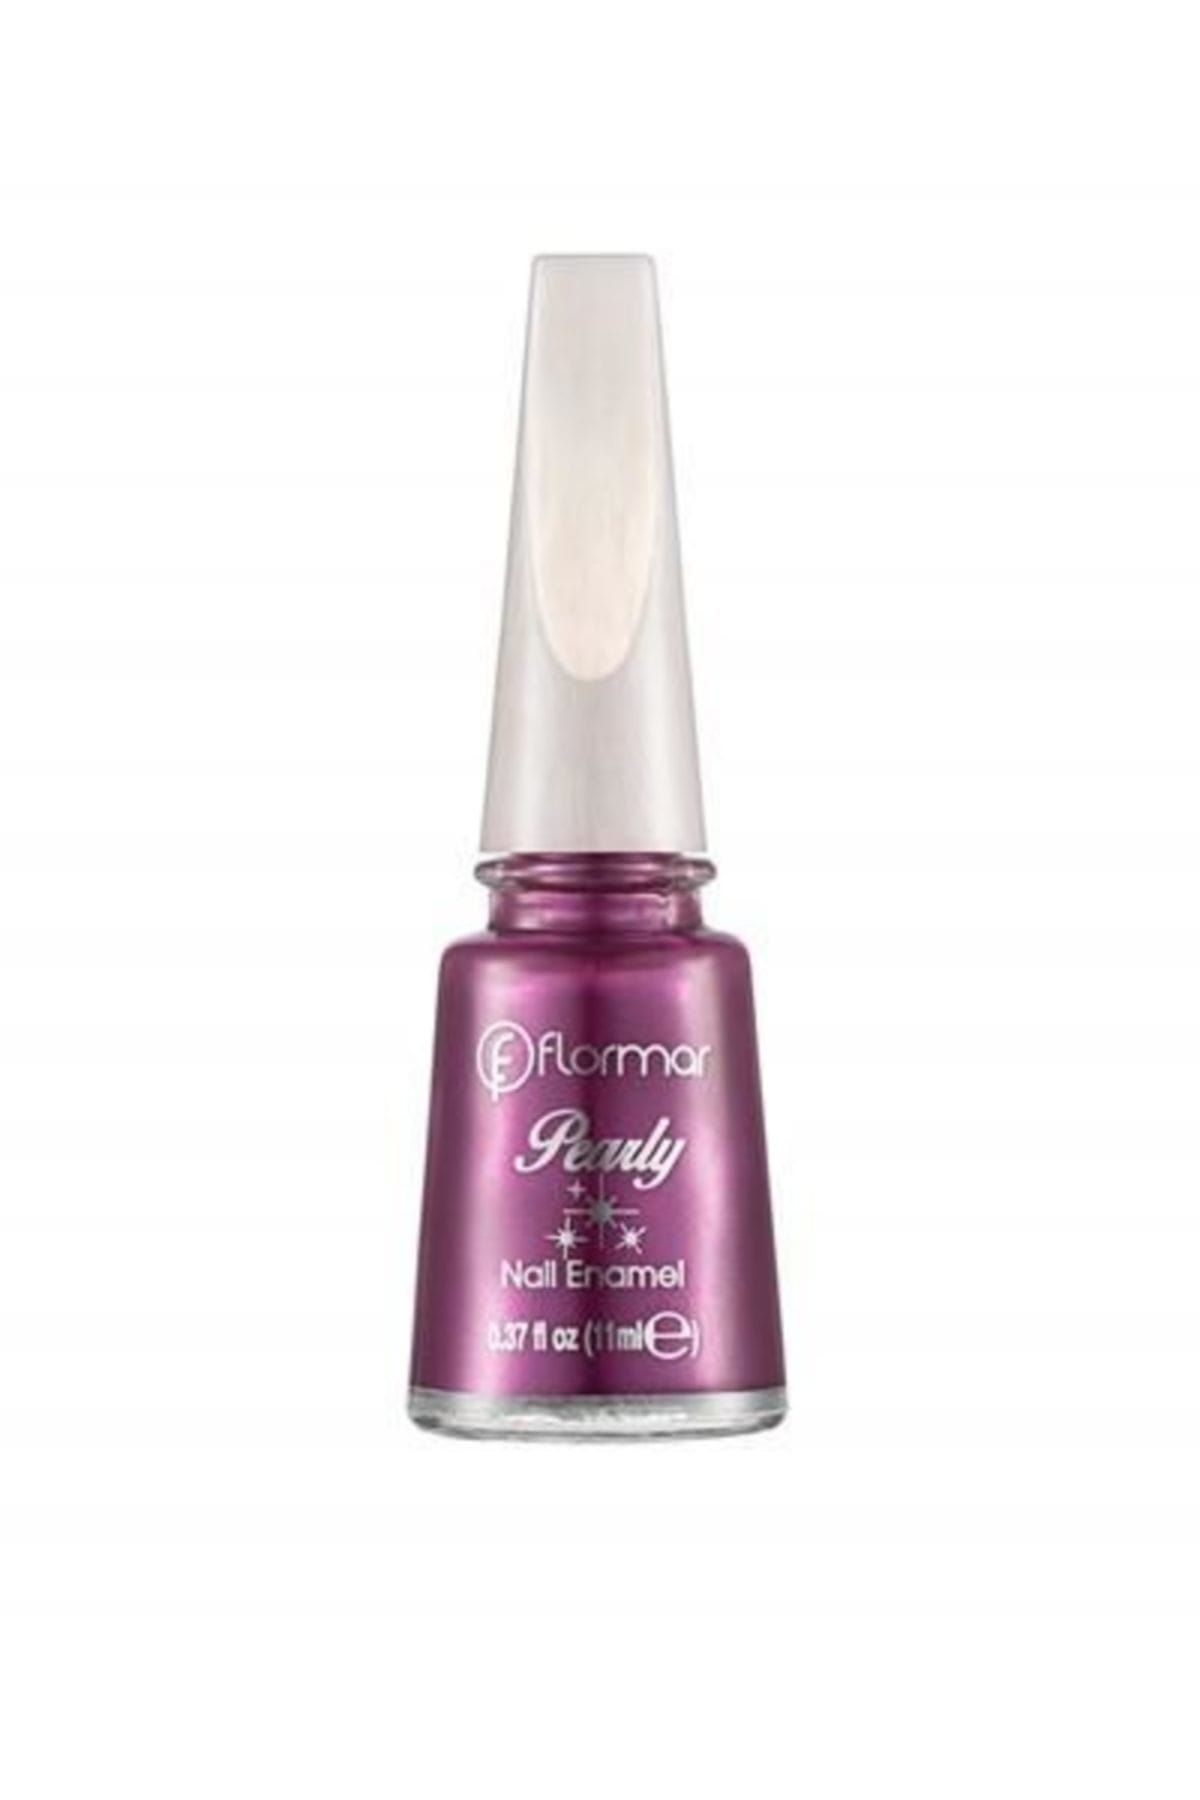 Flormar Pearly Oje - No:129 8690604280681